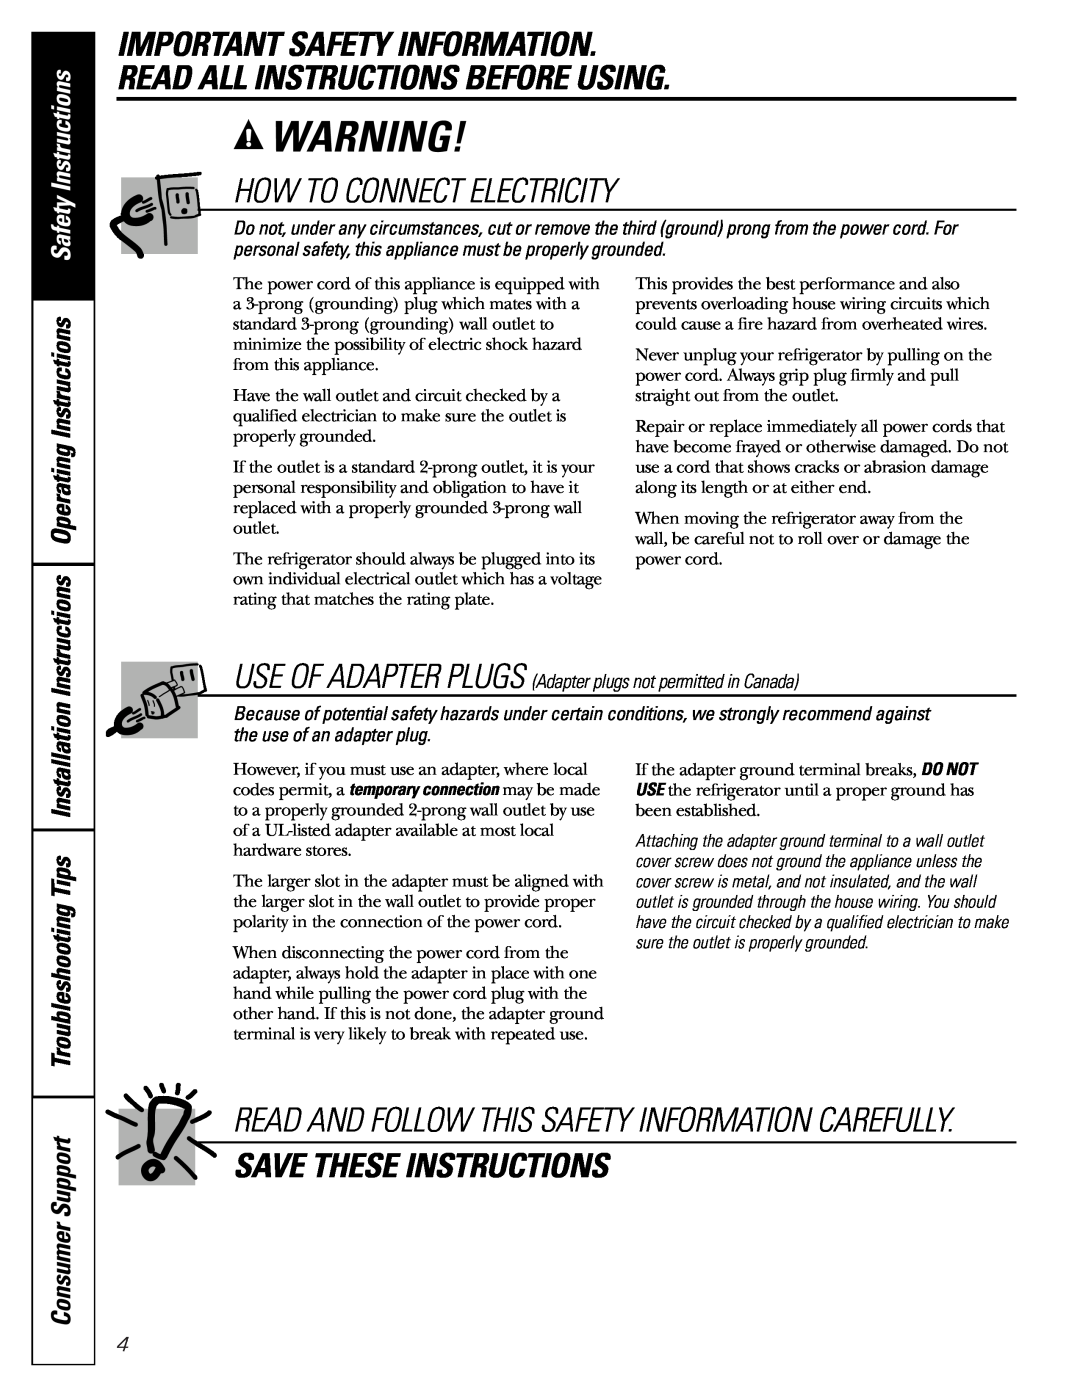 GE 200D2600P010 How To Connect Electricity, Save These Instructions, Troubleshooting Tips, Consumer Support 